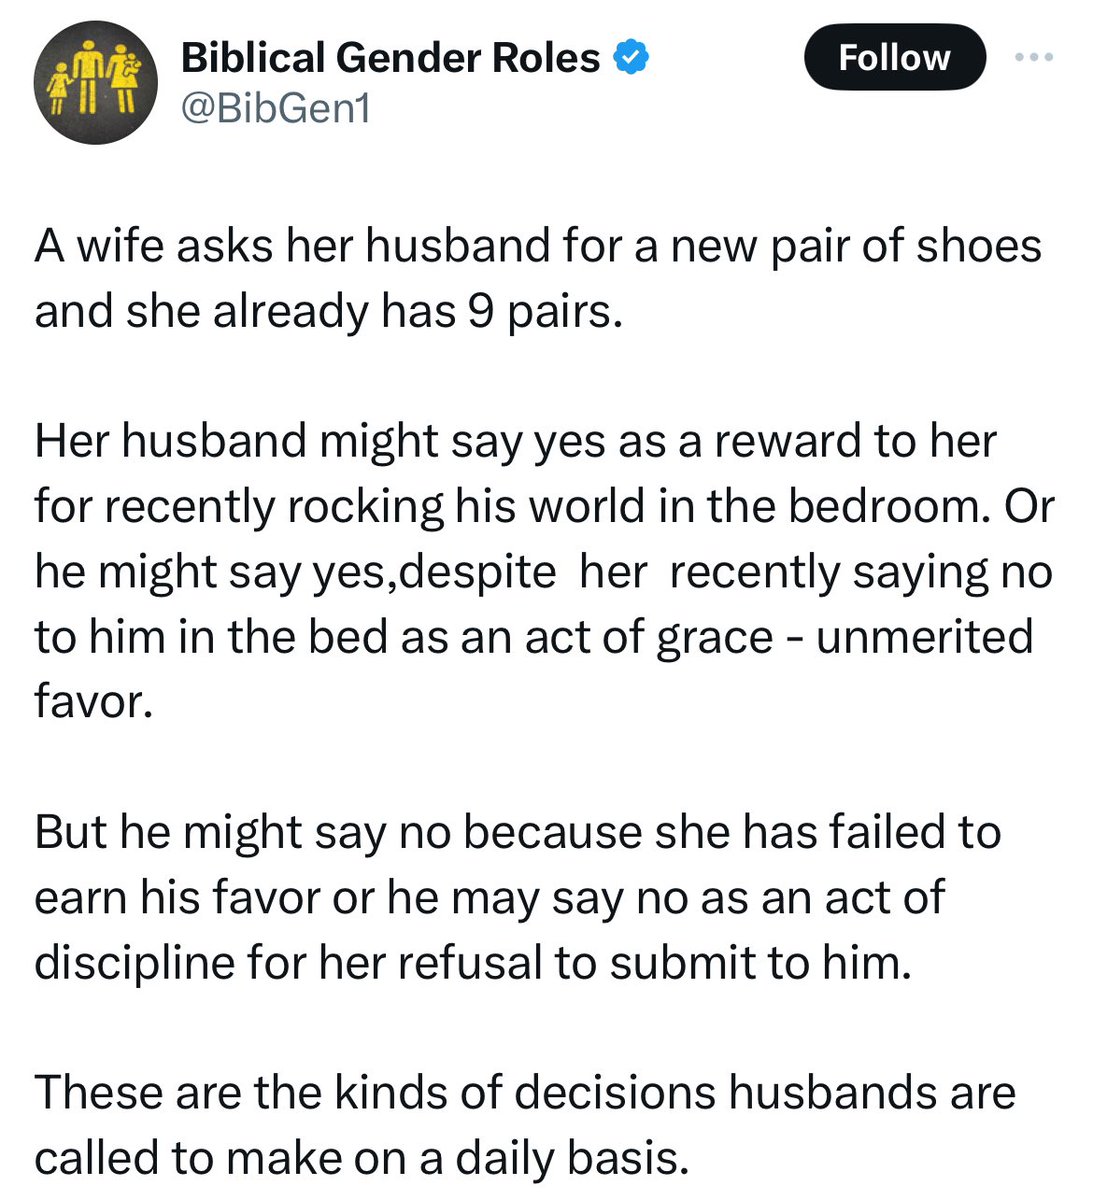 This is why I reject gender roles. I’m not a child. The only reason to deny a spouse a purchase is because the couple can’t afford it. Period. And sometimes that’s not even a good reason so you shift things around and make it happen.